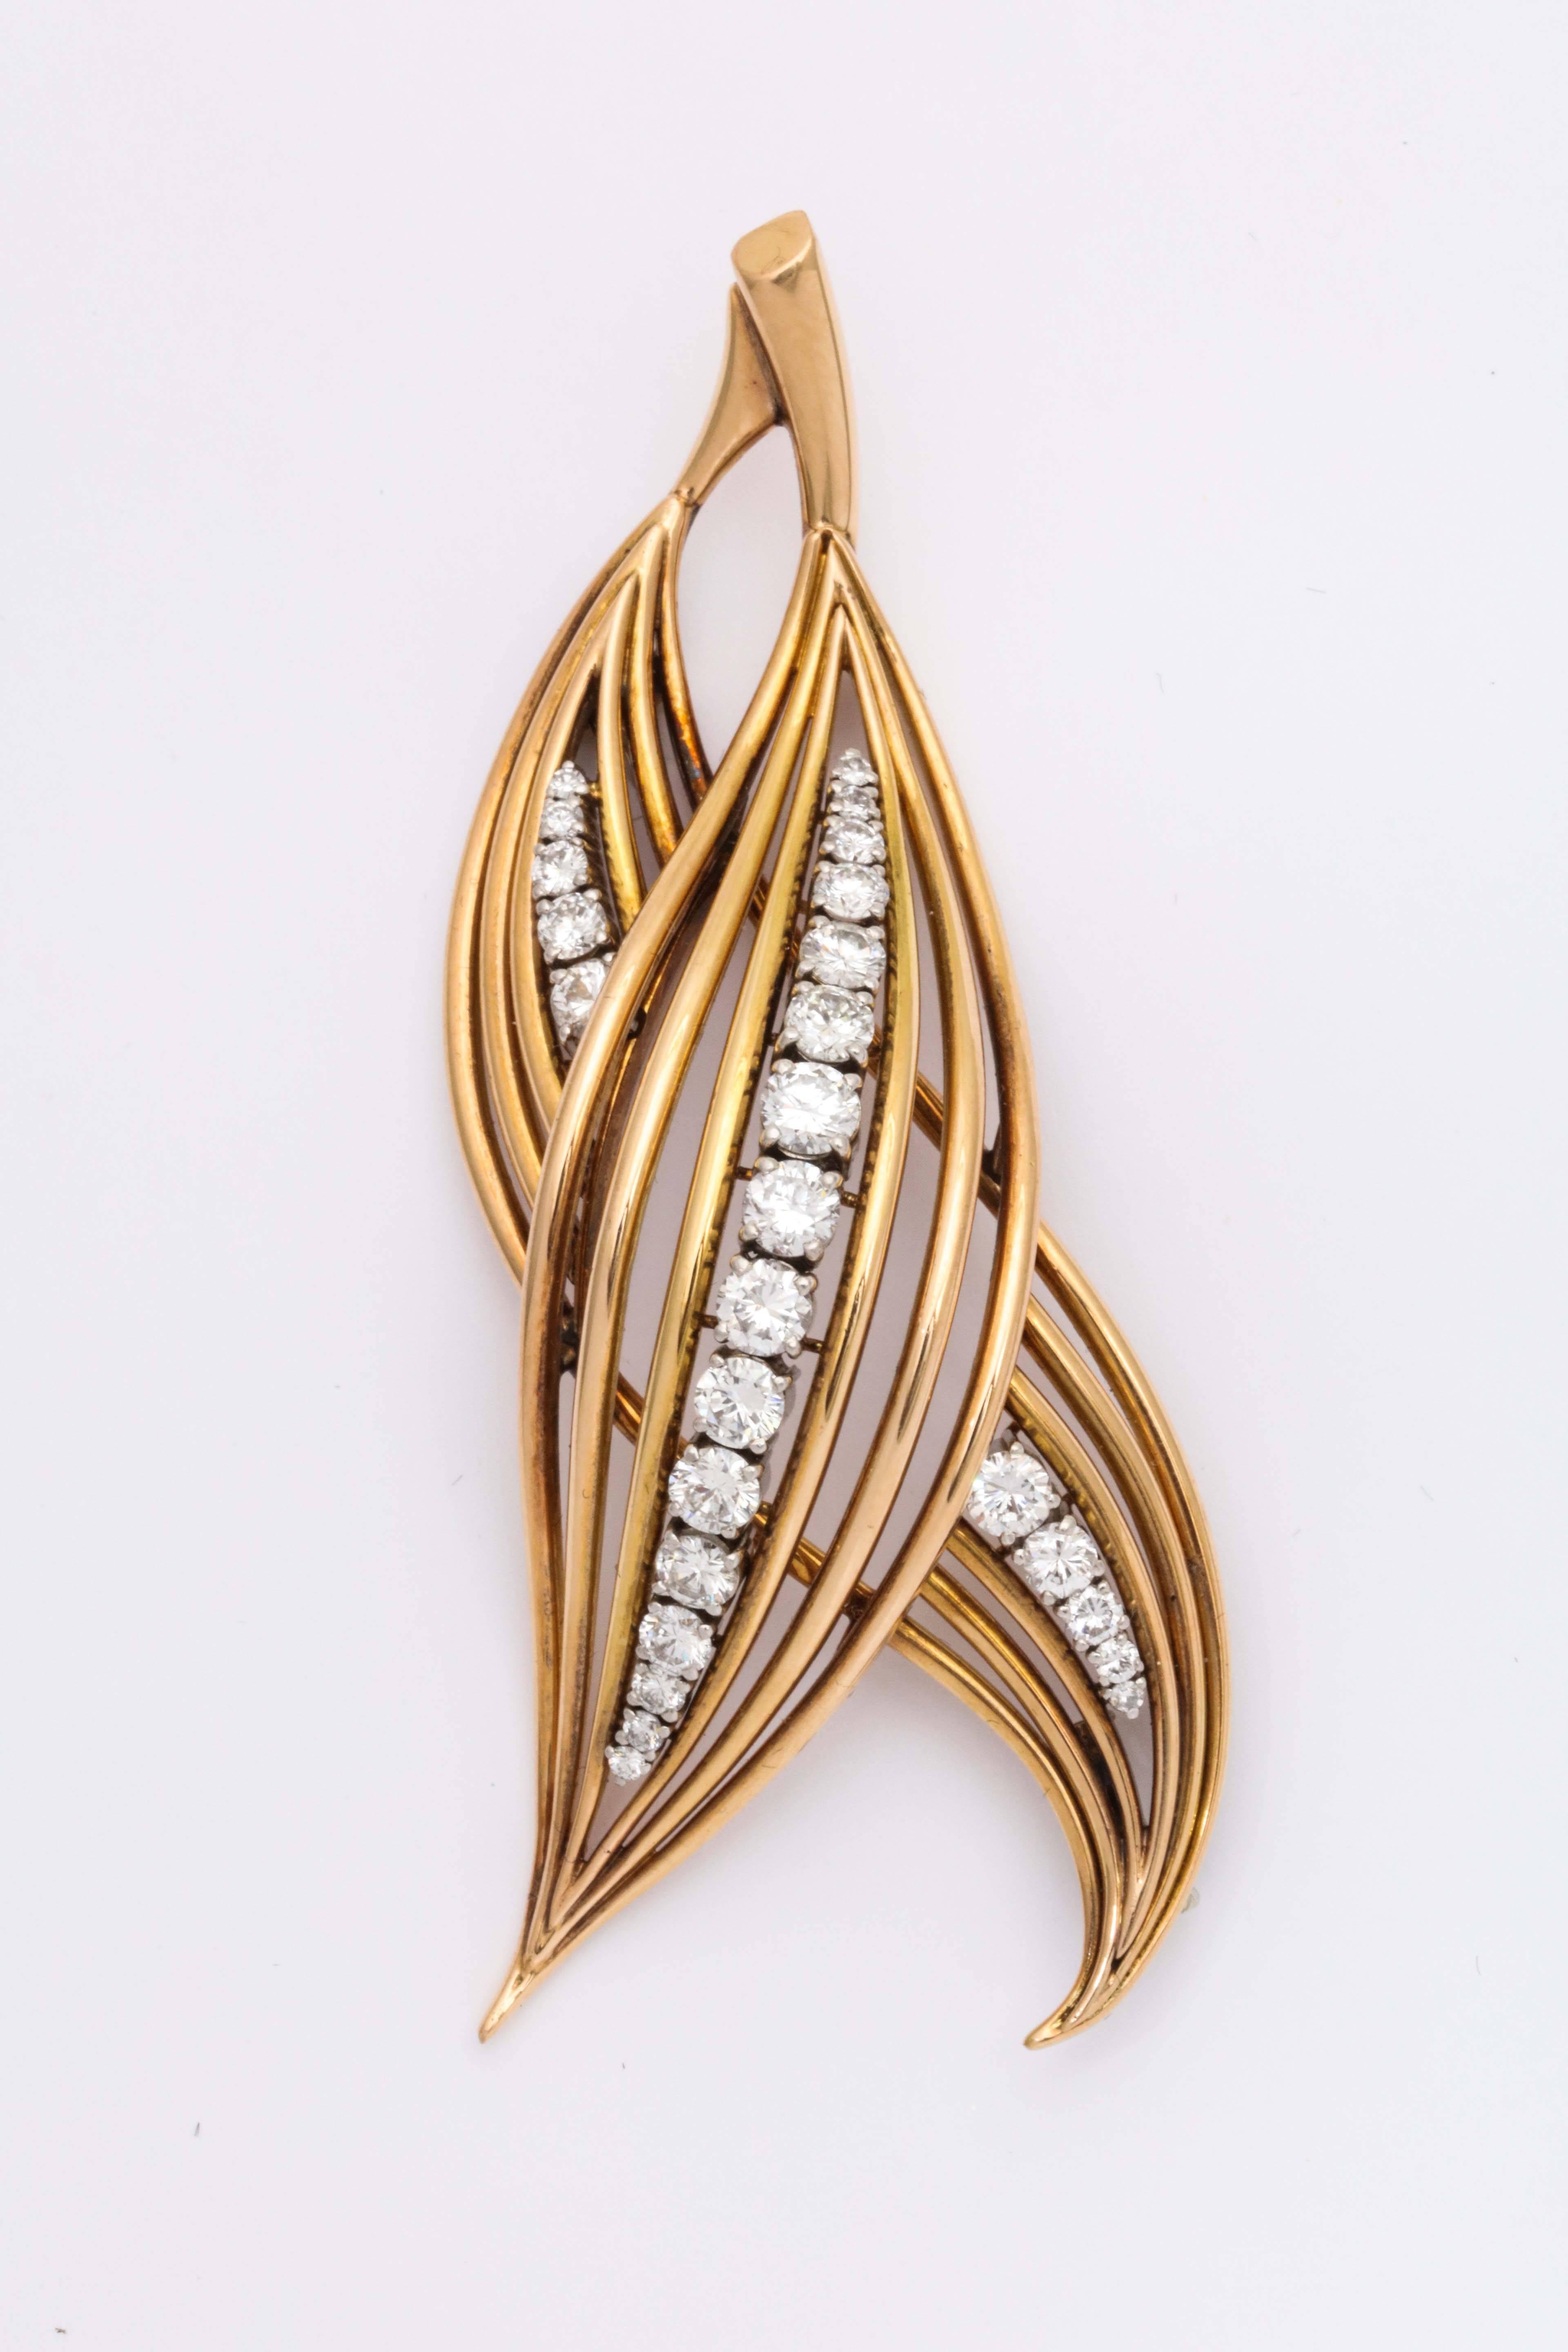 Beautiful Handmade Double Leaf Pin.  A pair of Pierced Leaves  set with Fine White Diamonds set in Platinum. down the middle of each Leaf.   Ca 1950.  Perfect for late lunch or cocktails.  Over 2.5cts of graduated full cut Diamonds